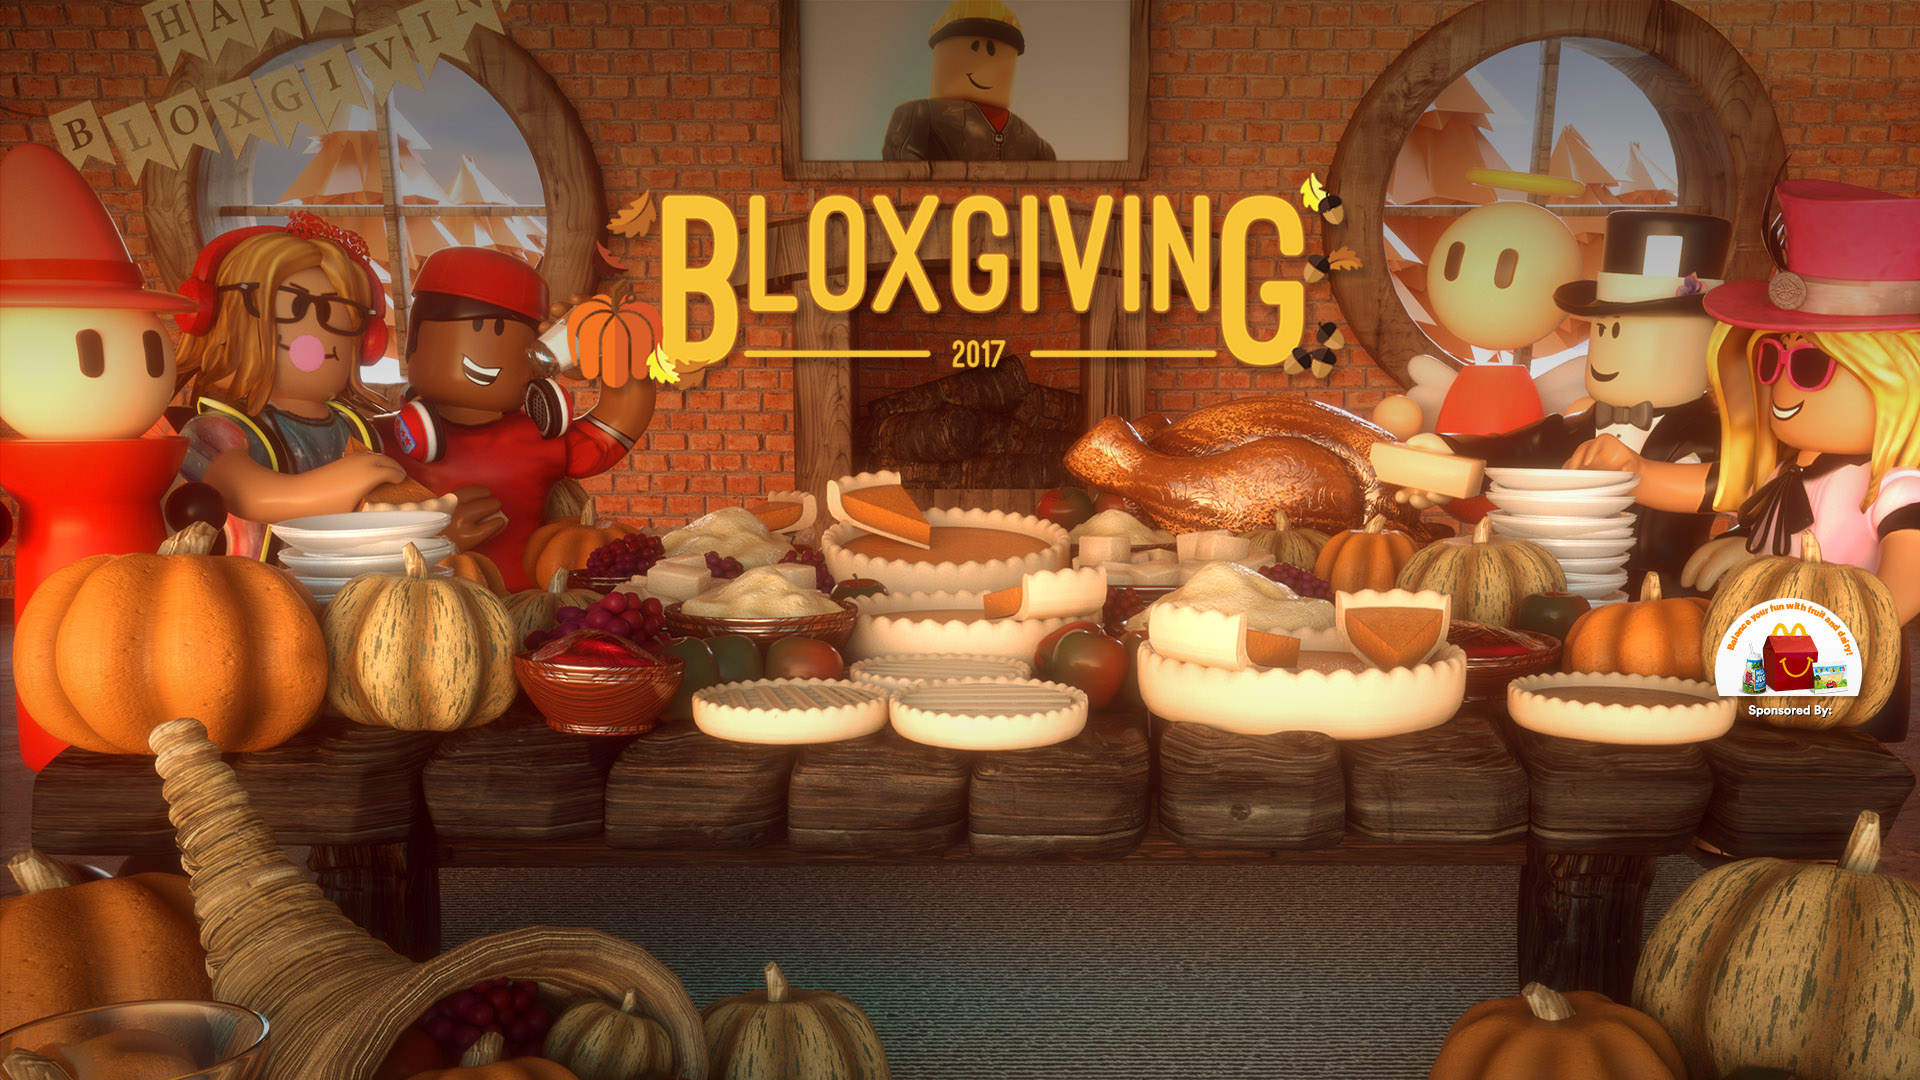 Give Thanks For Roblox In The Bloxgiving Event Sponsored By